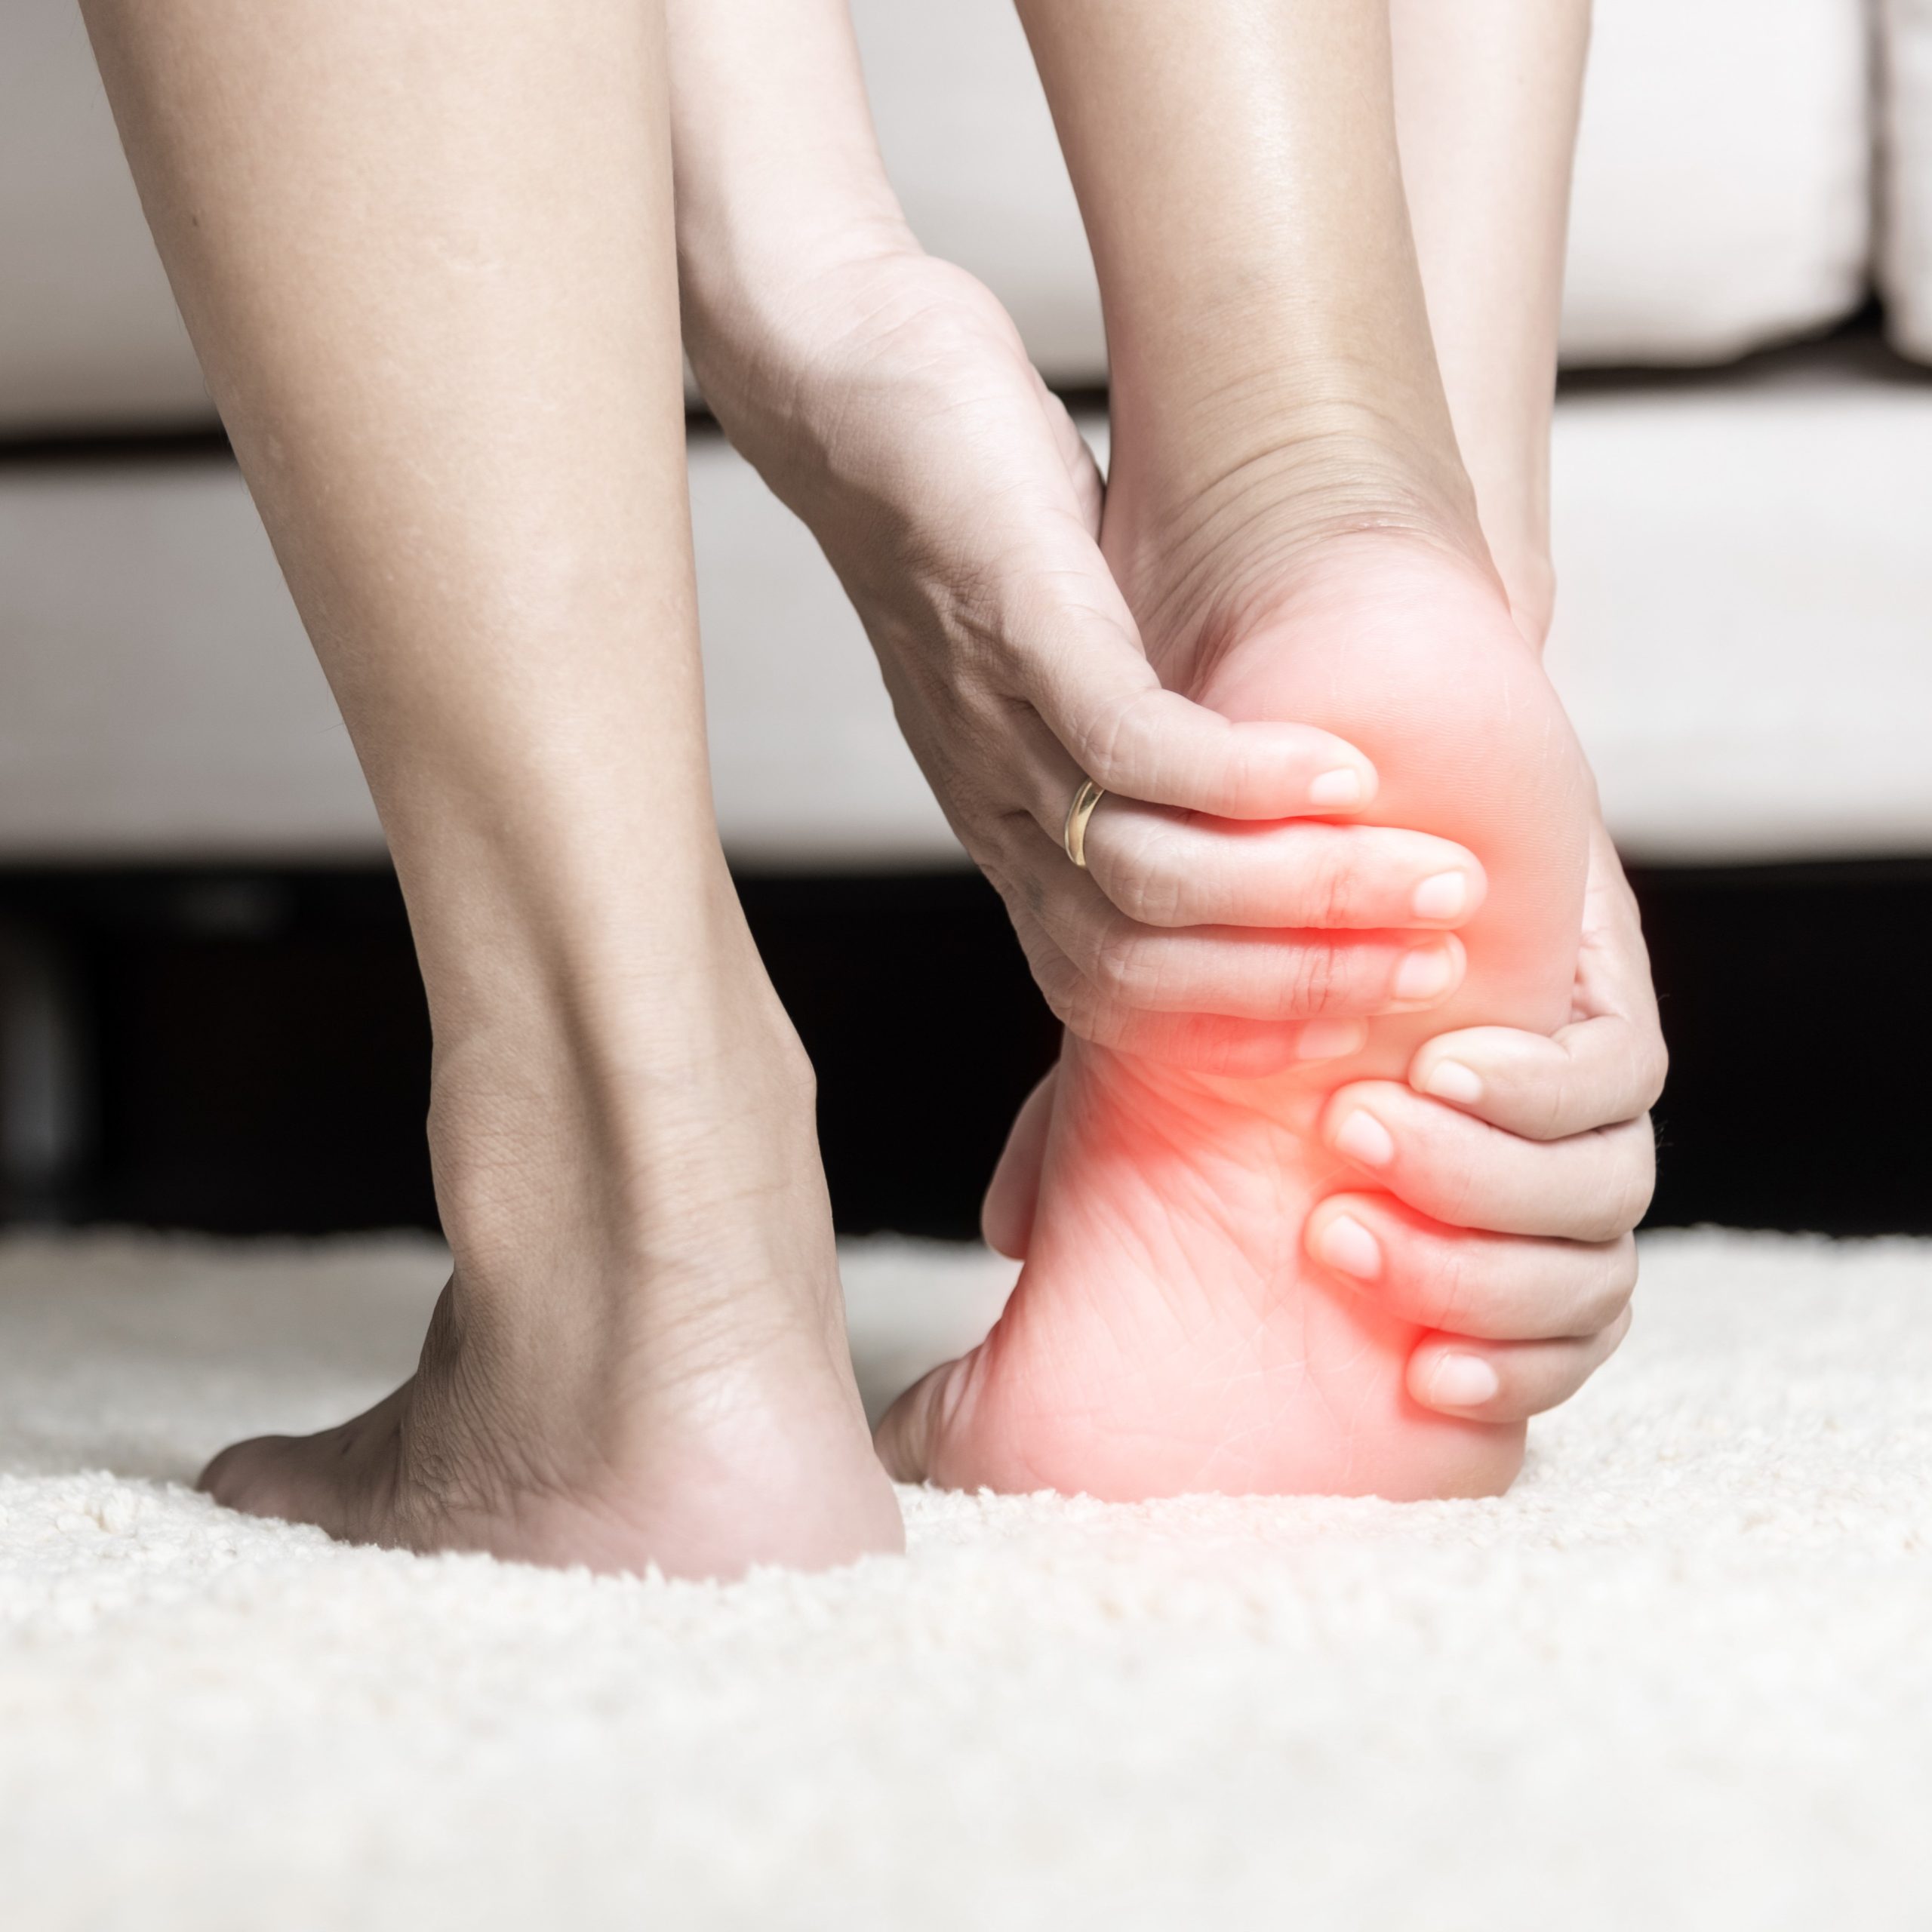 Plantar fasciitis: A common cause of heel and foot pain - Dulwich